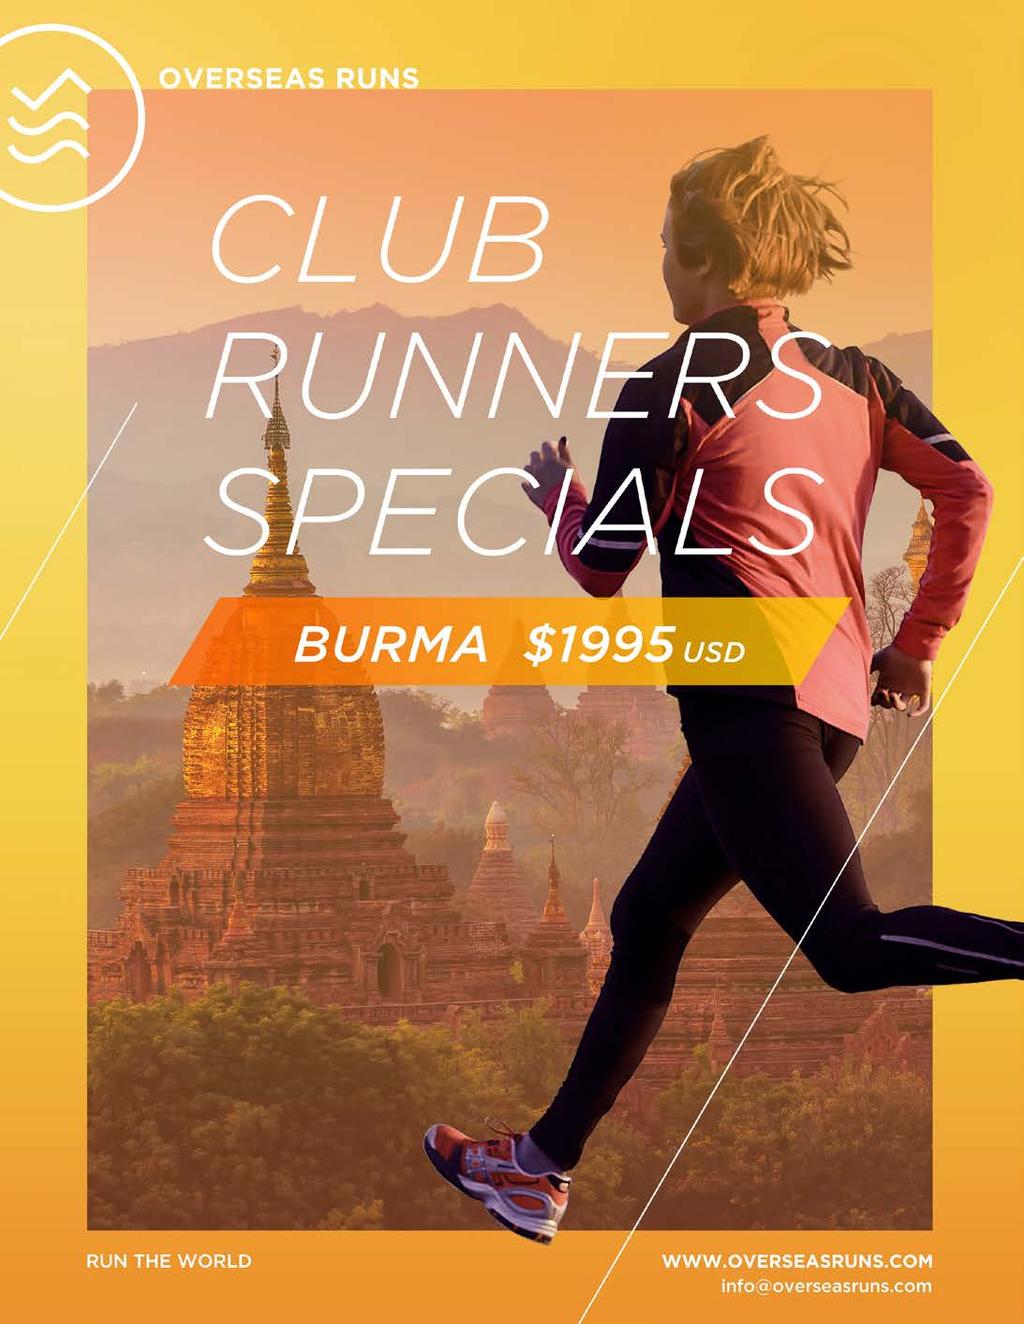 Overseas Runs provides an array of adventures overseas to whet the appetite for any runners dream, whether following the trails through Temples sites in exotic locations in Burma or Cambodia to